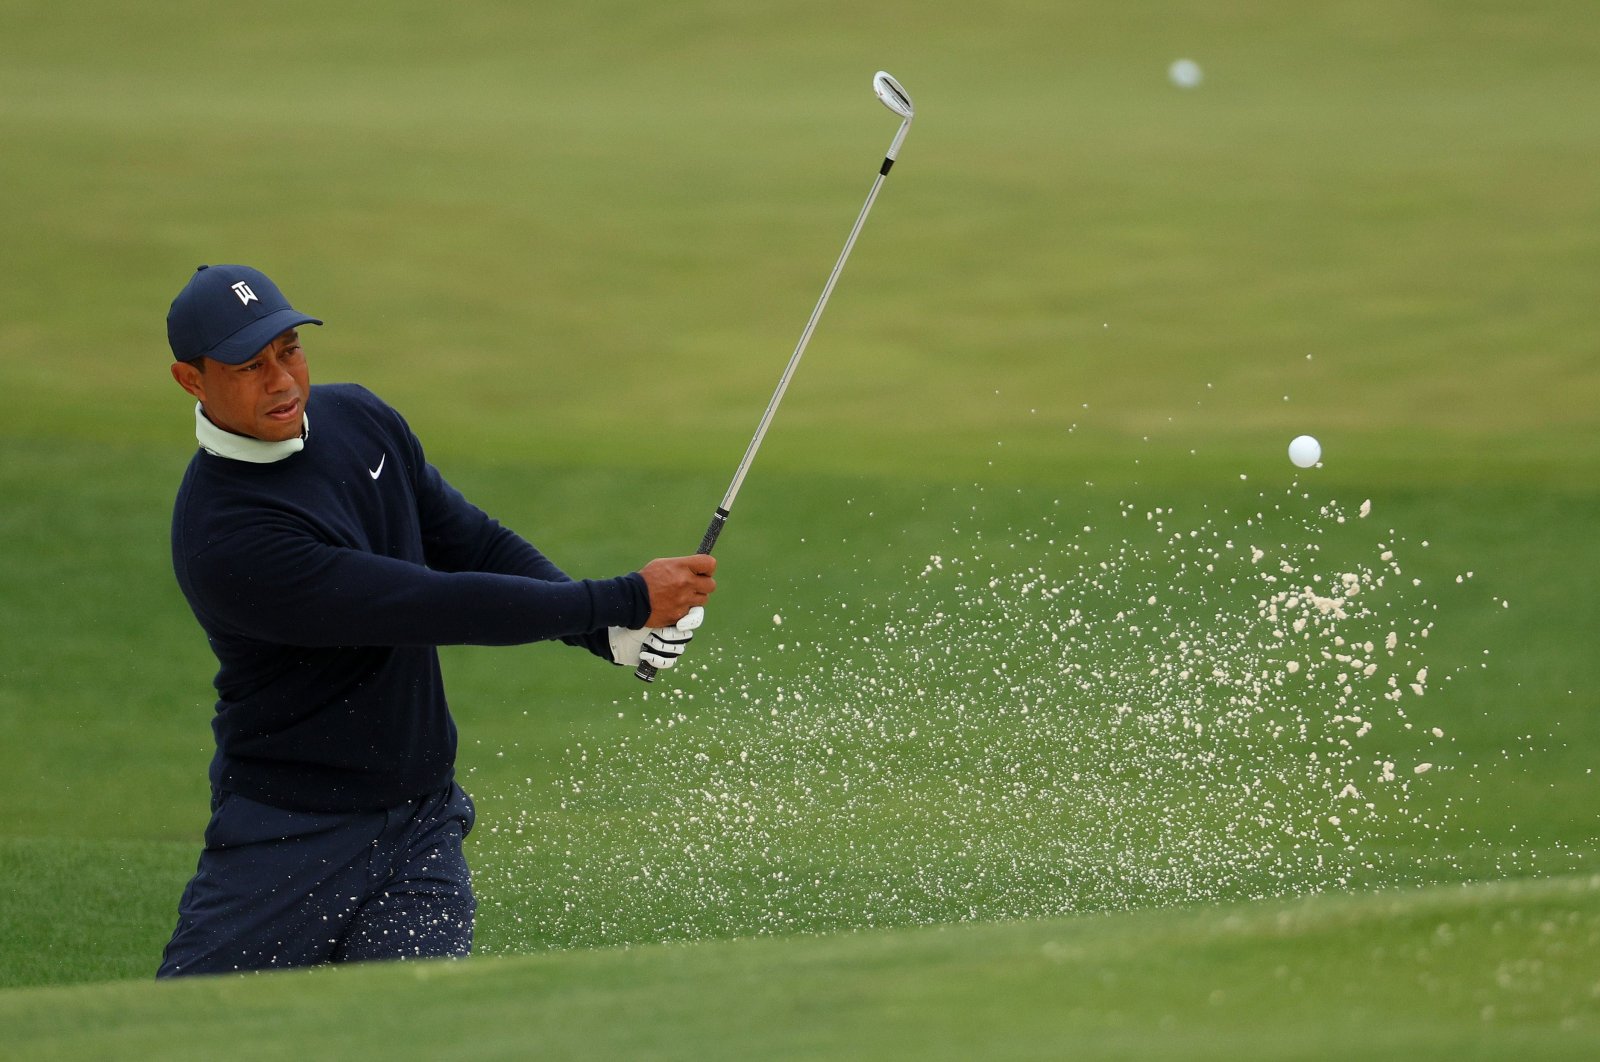 Tiger Woods warms up during a practice round prior to the Masters at Augusta National Golf Club, Augusta, Georgia, U.S., April 05, 2022. (AFP Photo)